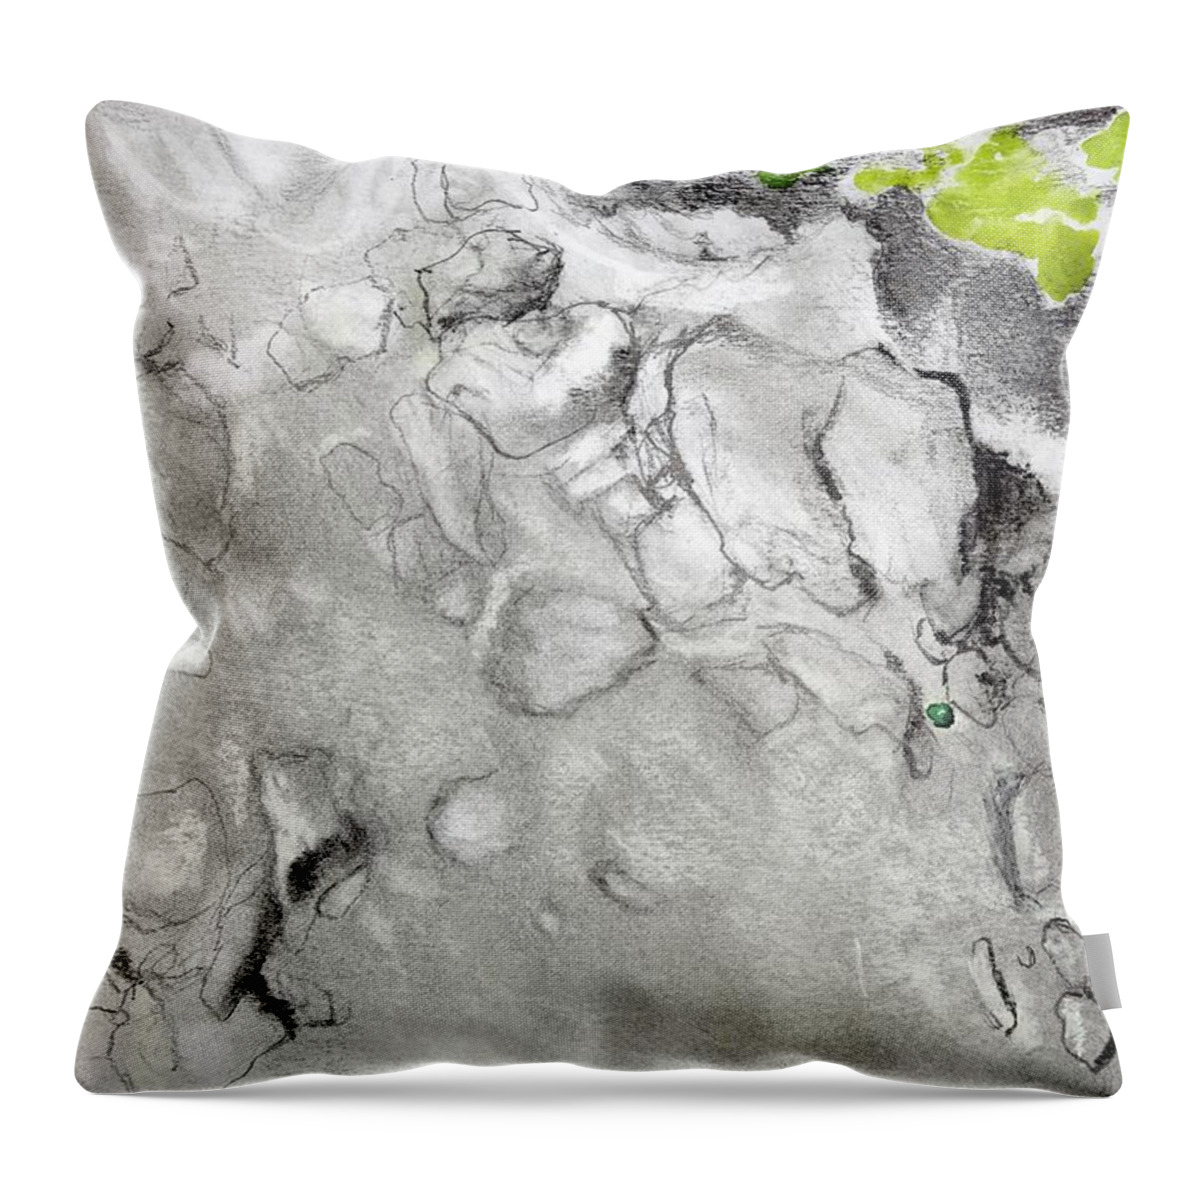  Throw Pillow featuring the painting Green and Gray Stones by Kathleen Barnes